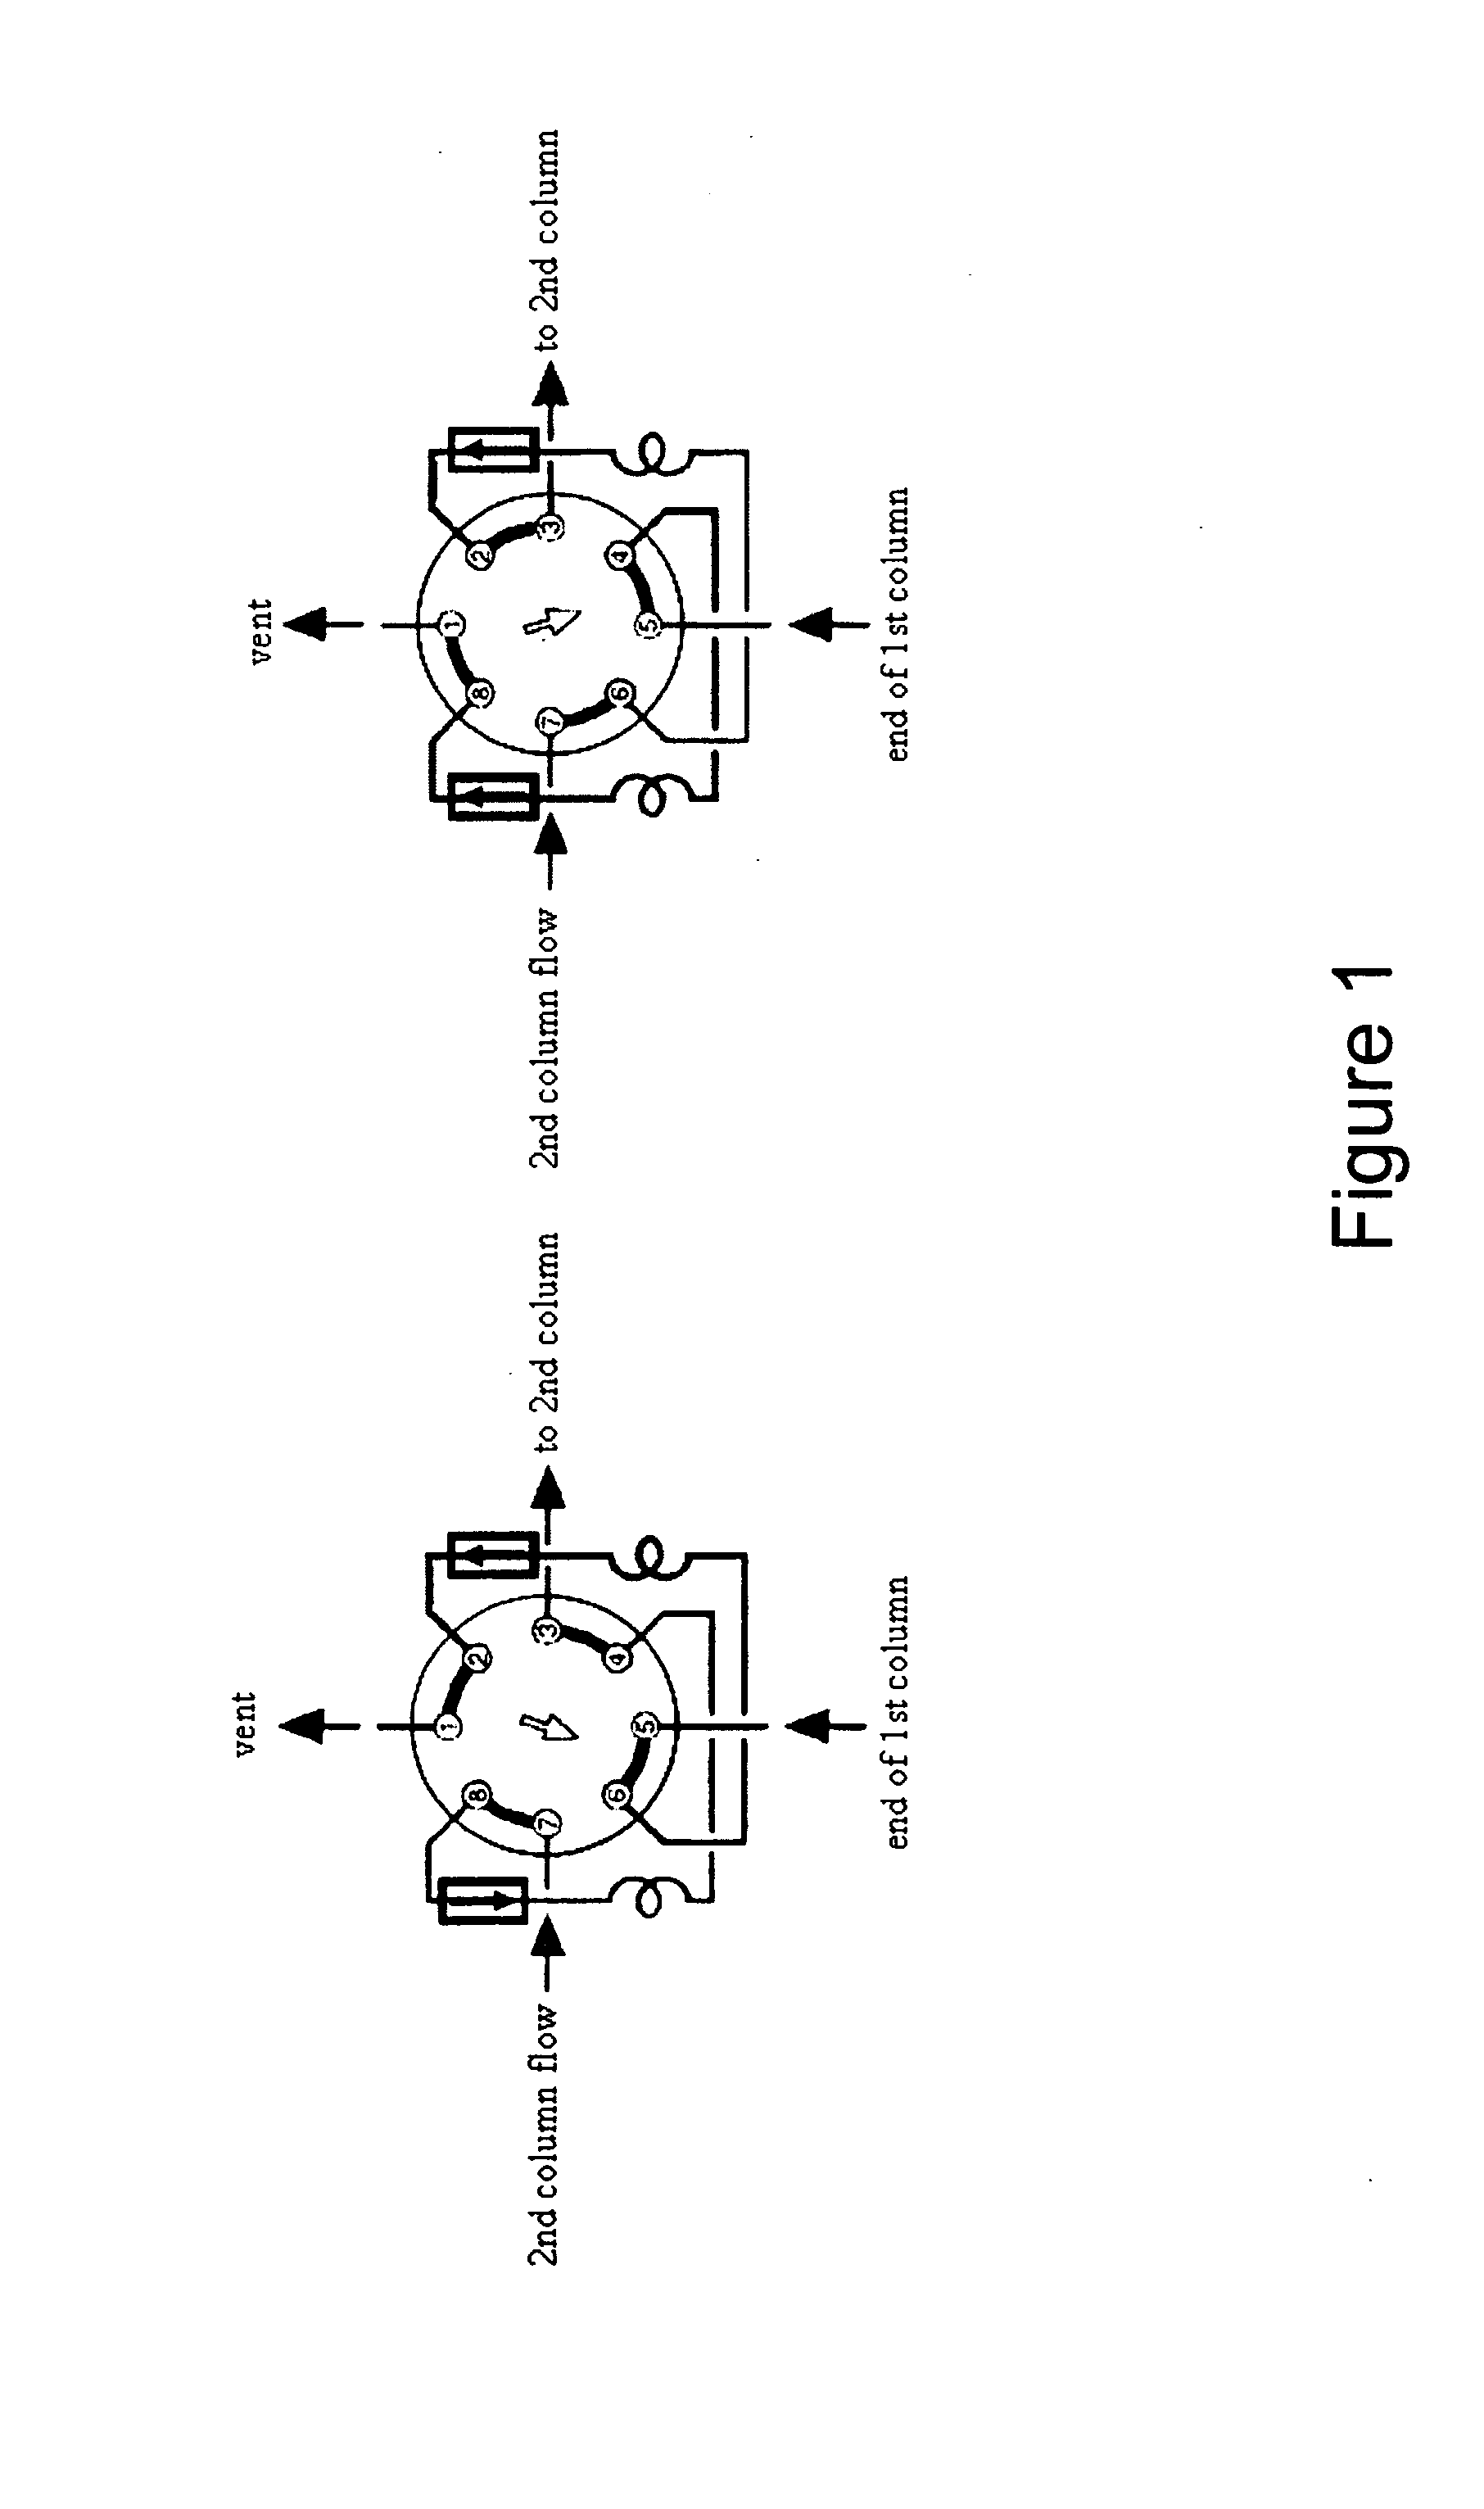 Comprehensive two-dimensional gas chromatography method with one switching valve as the modulator